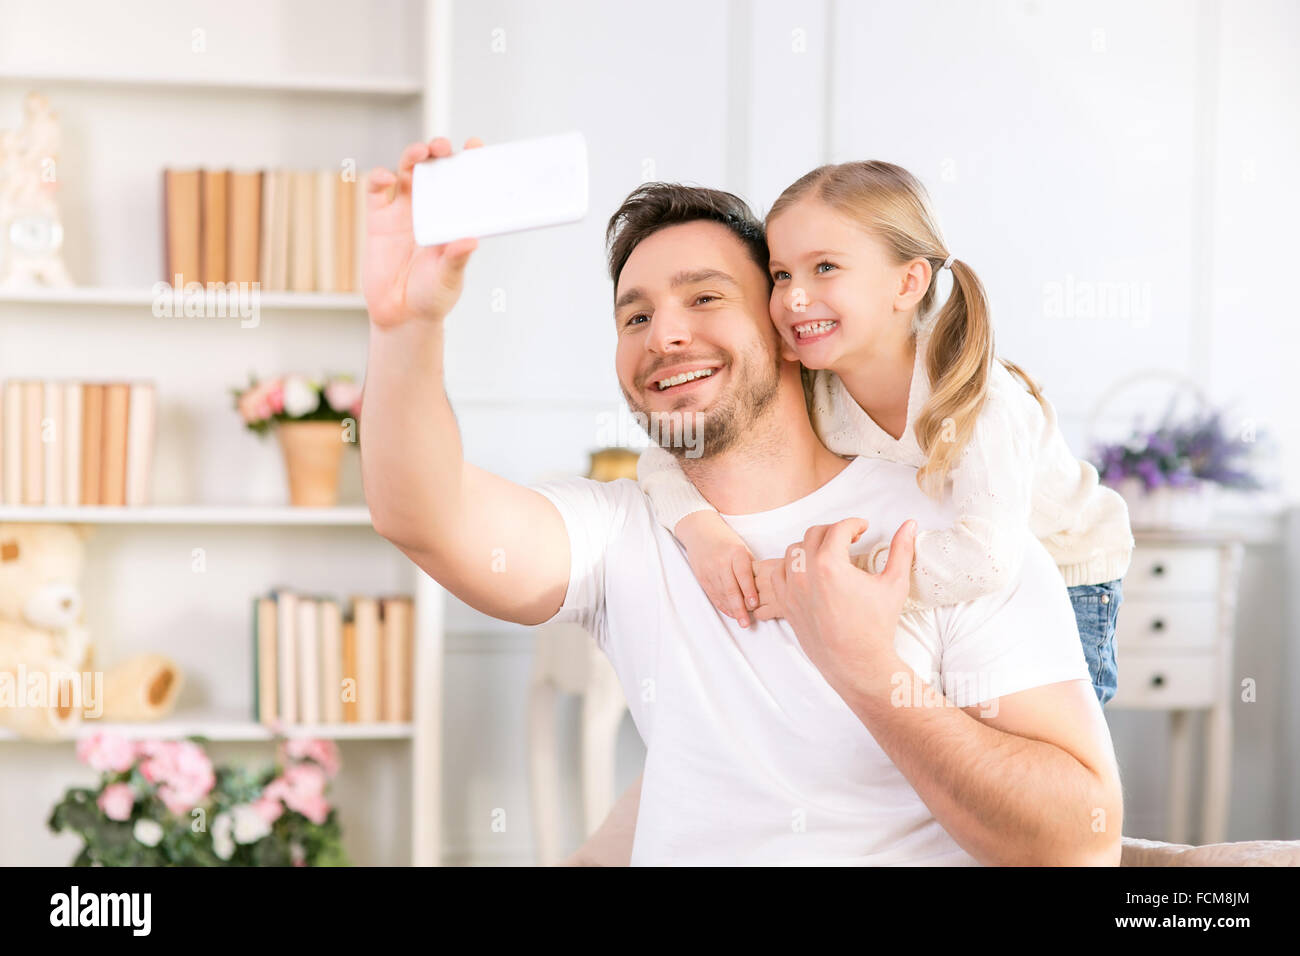 Father and daughter having fun together Stock Photo